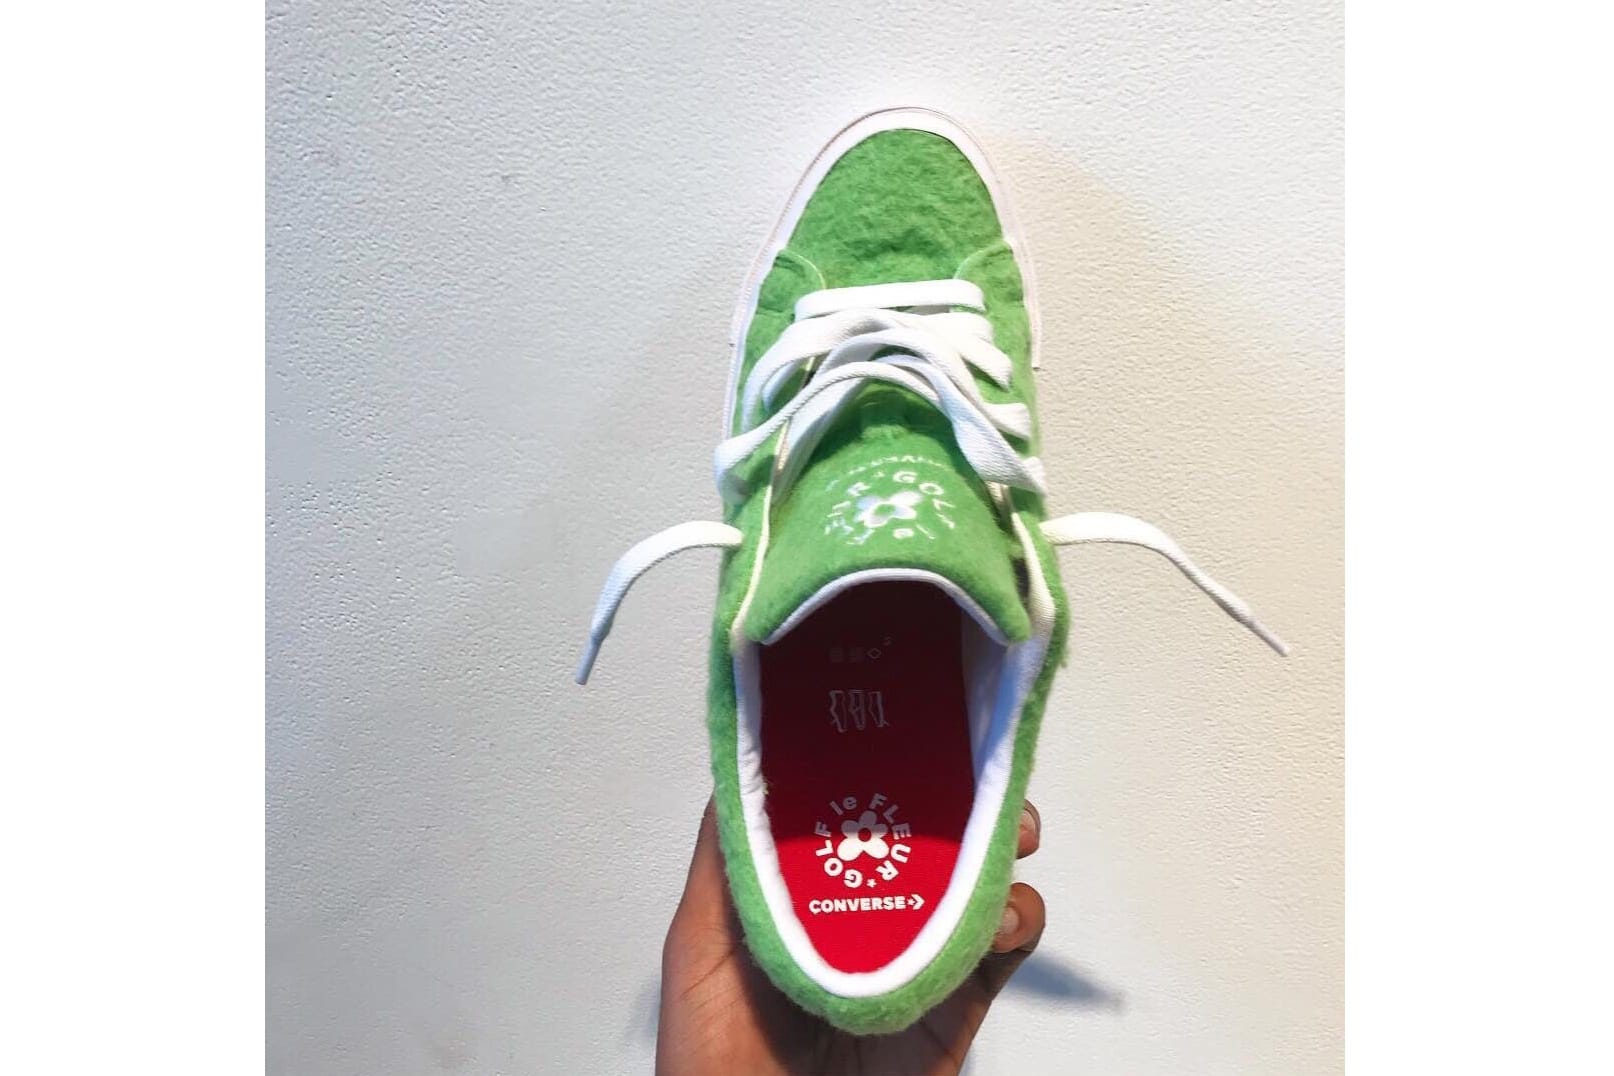 converse the grinch